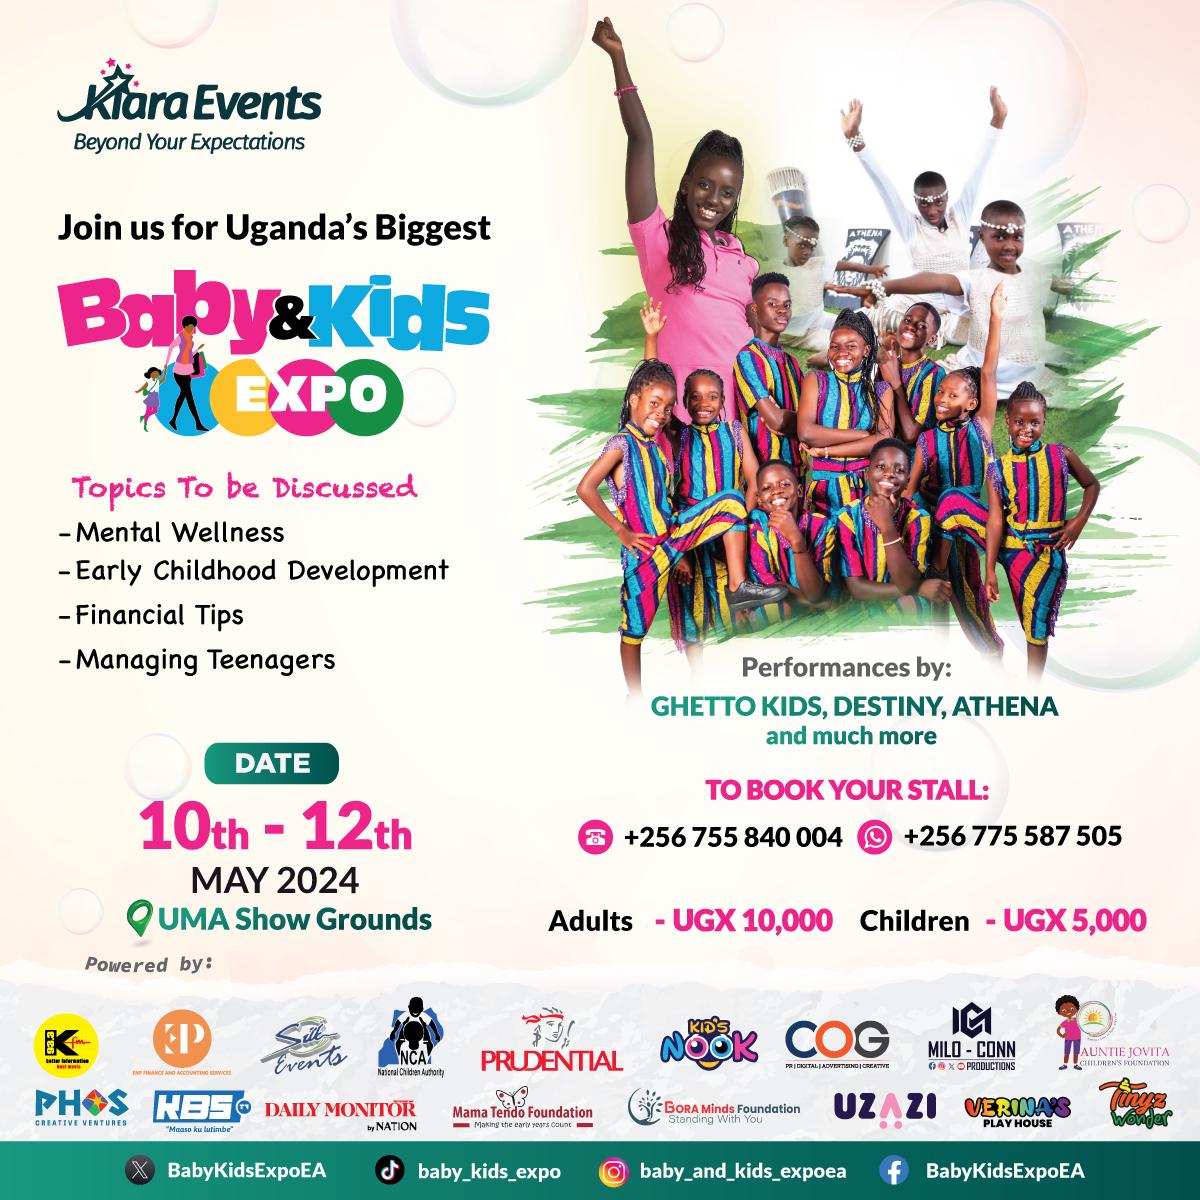 Get ready for Uganda's biggest #BabyandKidsExpo24 at UMA Showgrounds from May 10th to 12th, 2024! 🎉 

Enjoy three days of non-stop fun, shopping and learning, featuring performances by the incredible @ghettokidstfug,  Athena and Destiny, daughter of Winnie Nwagi.

  #KiaraEvents